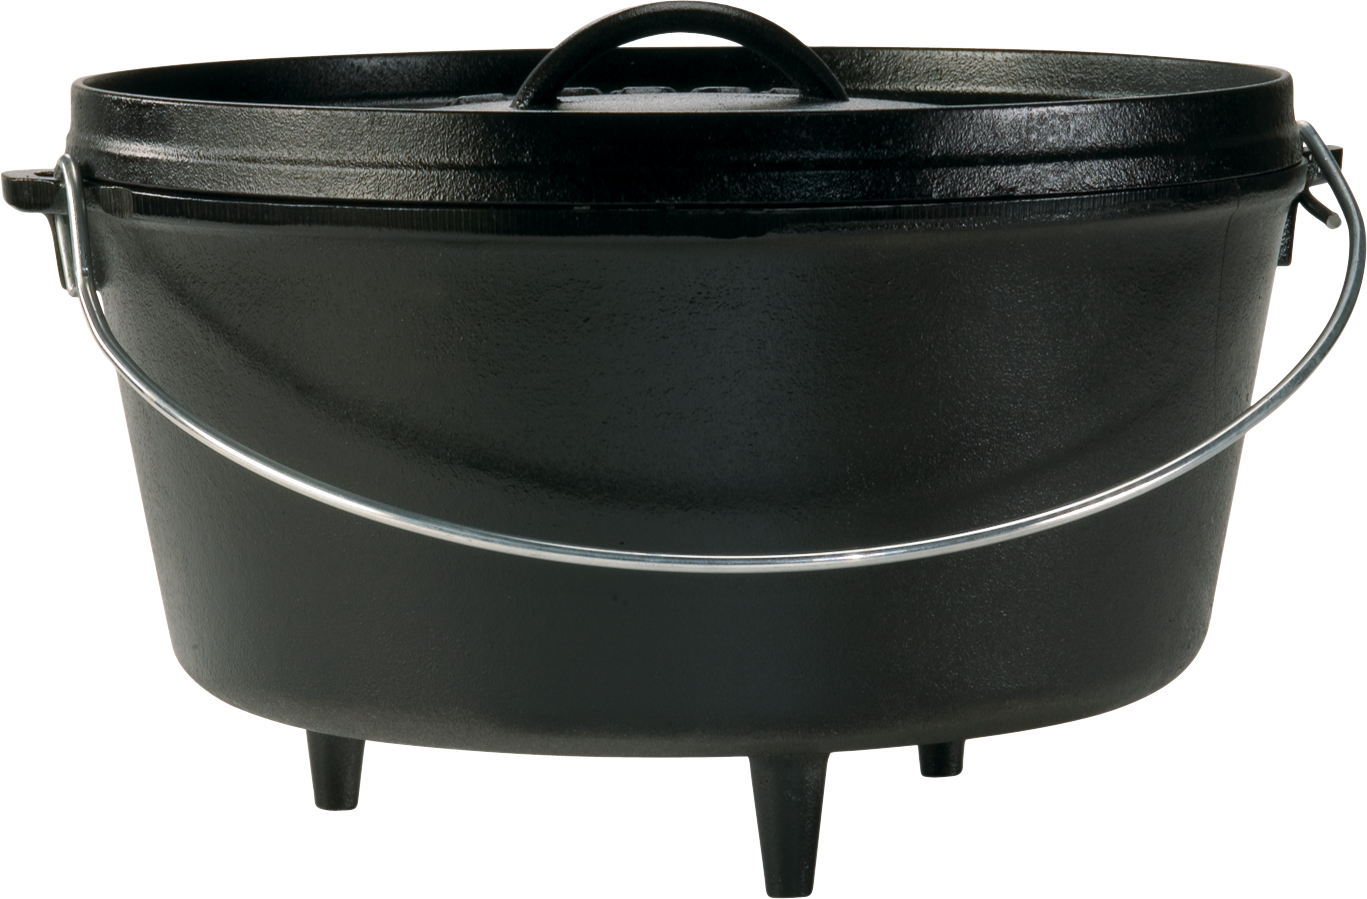 Cabela's Outfitter Series Cast Iron Camp Oven